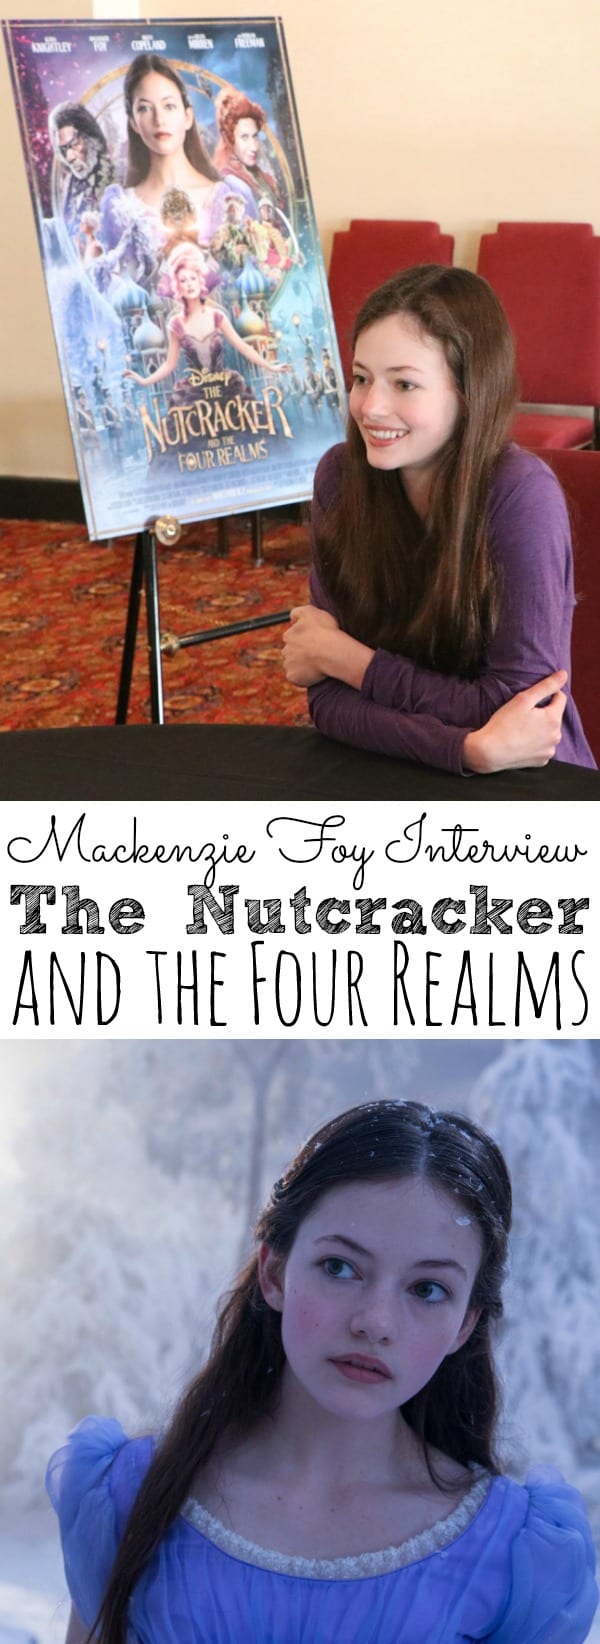 Mackenzie Foy Interview The Nutcracker and the Four Realms